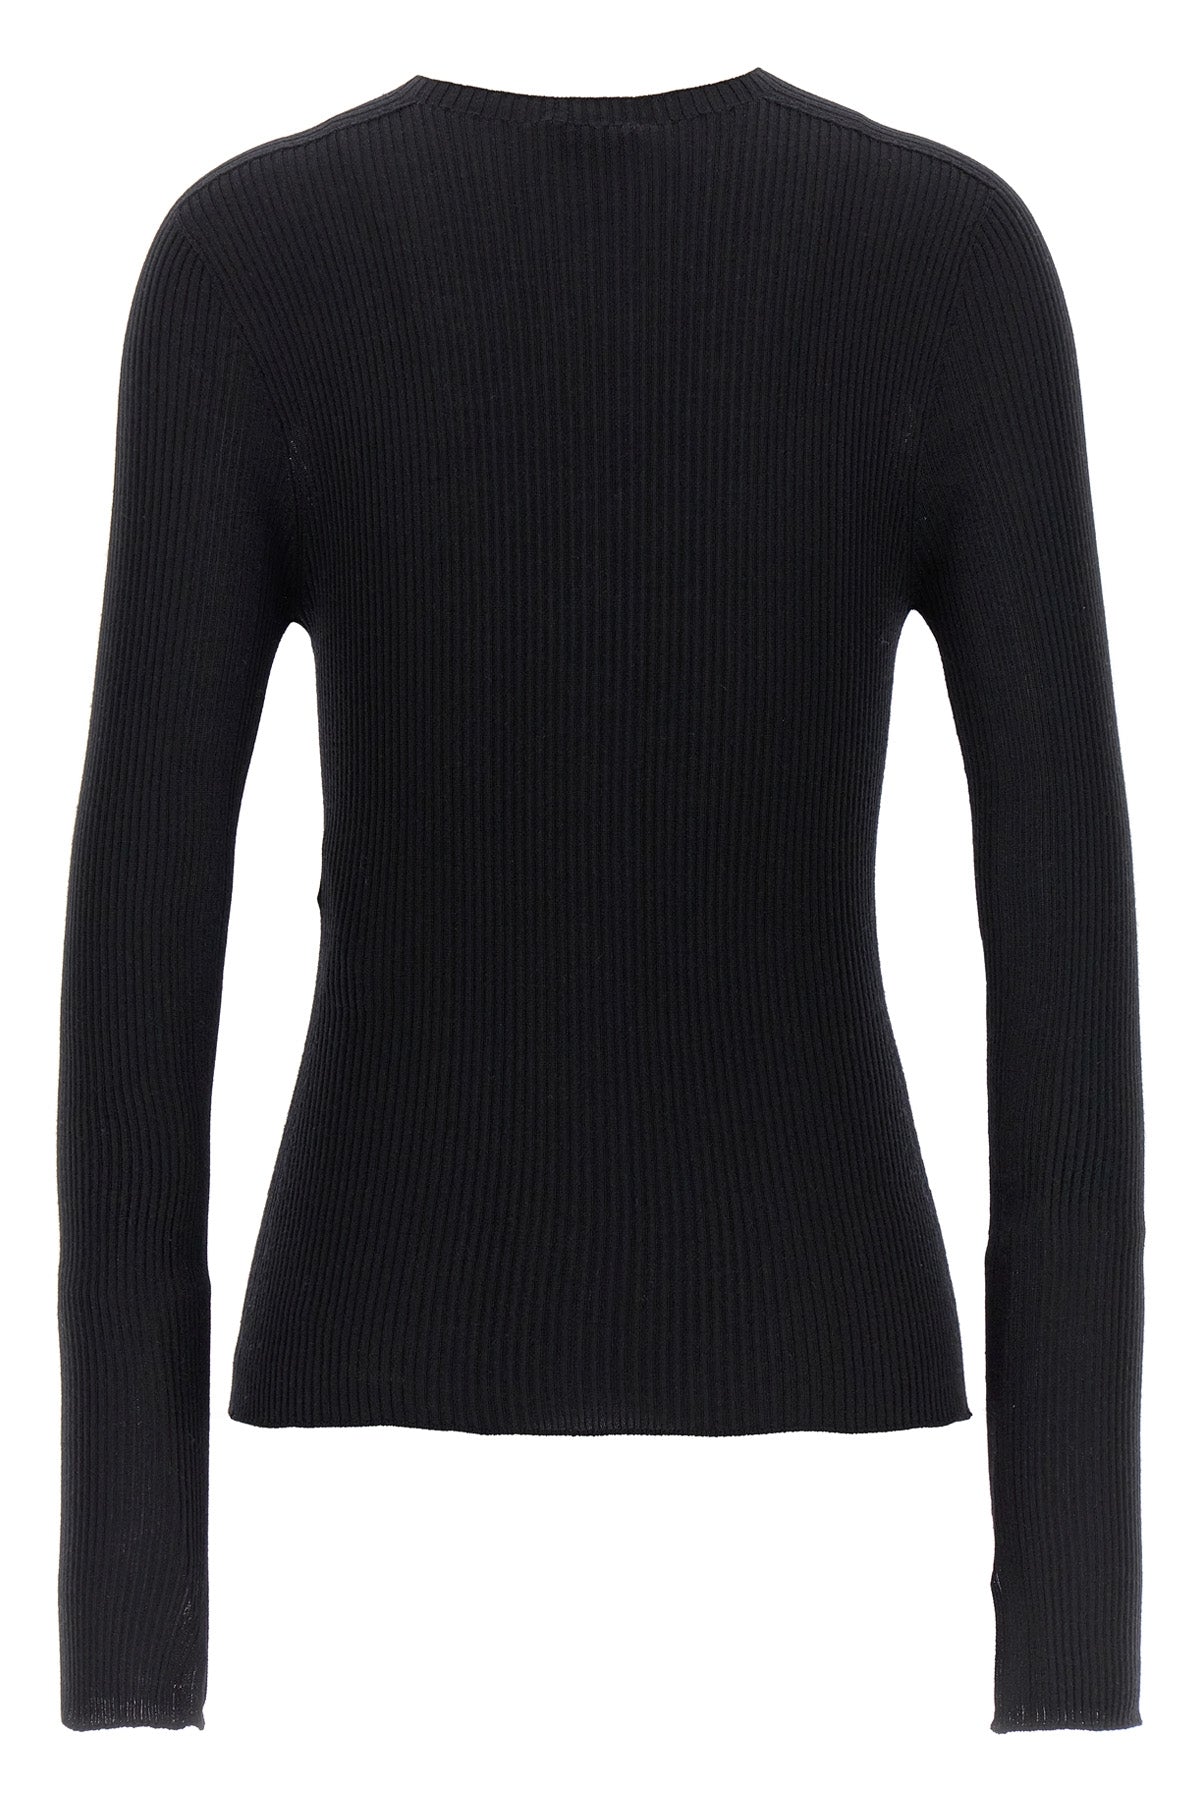 LANVIN RIBBED SWEATER